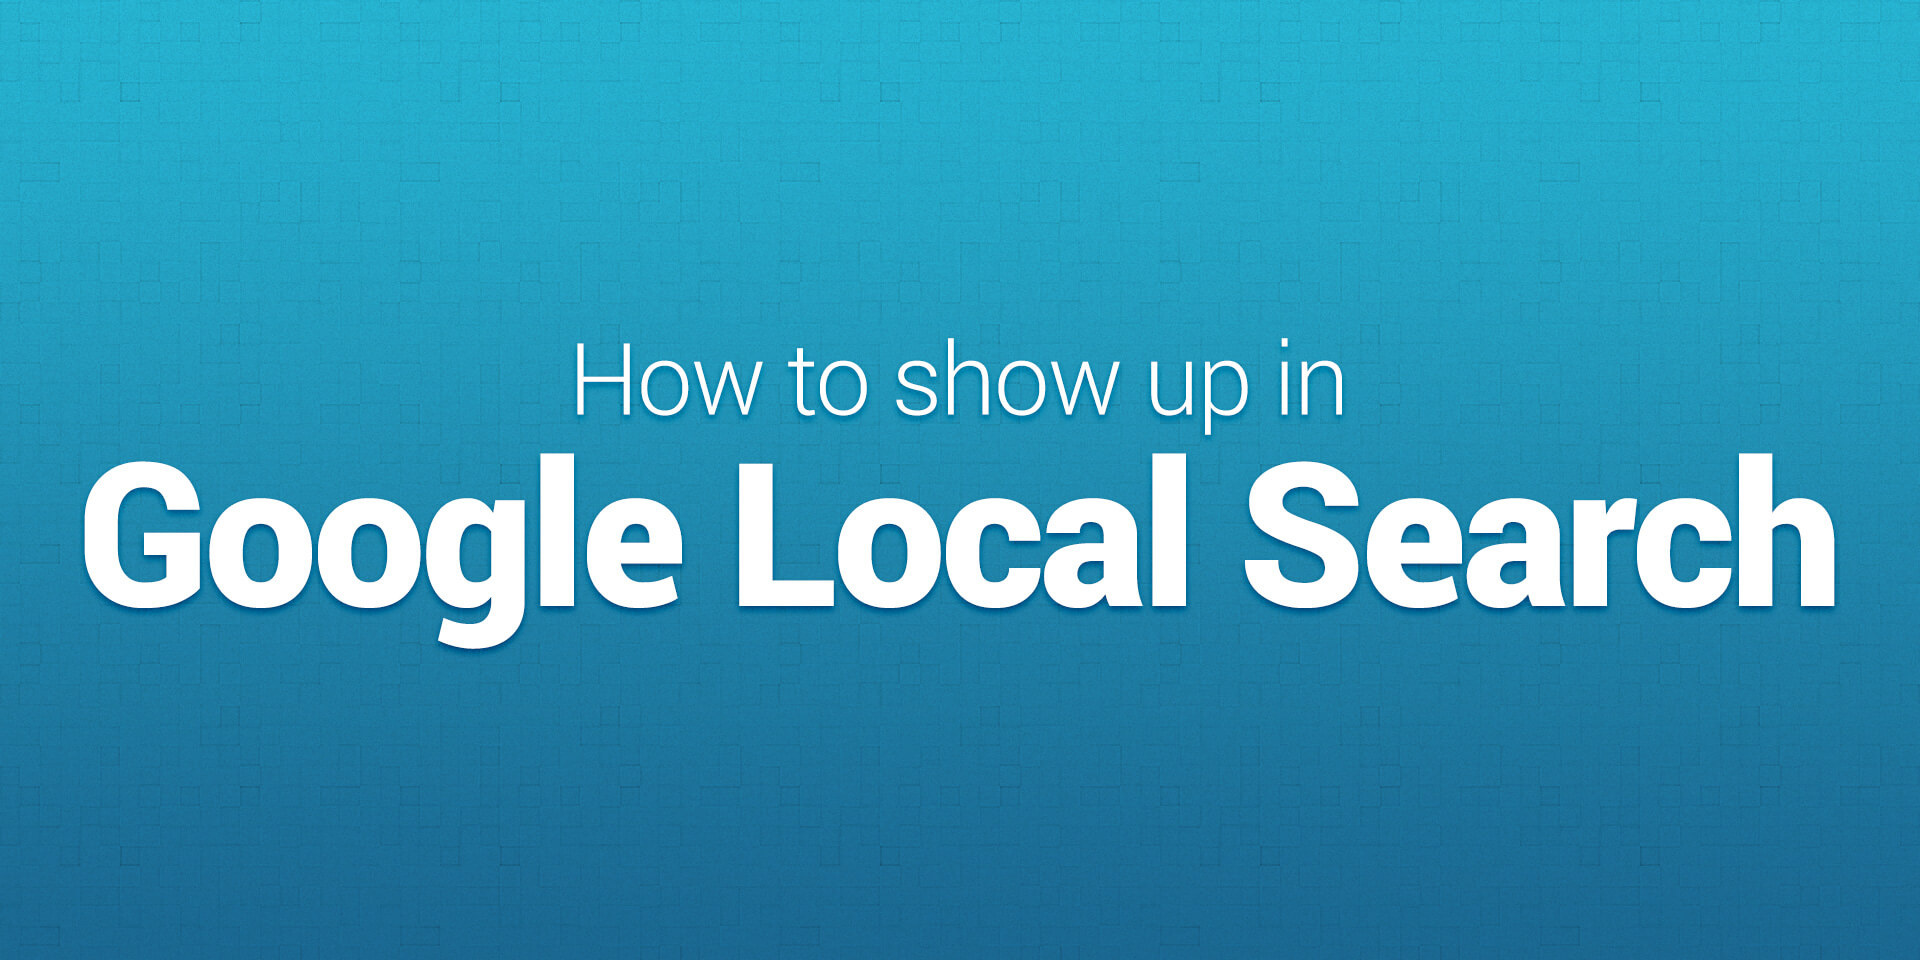 How to show up in Google Local Search